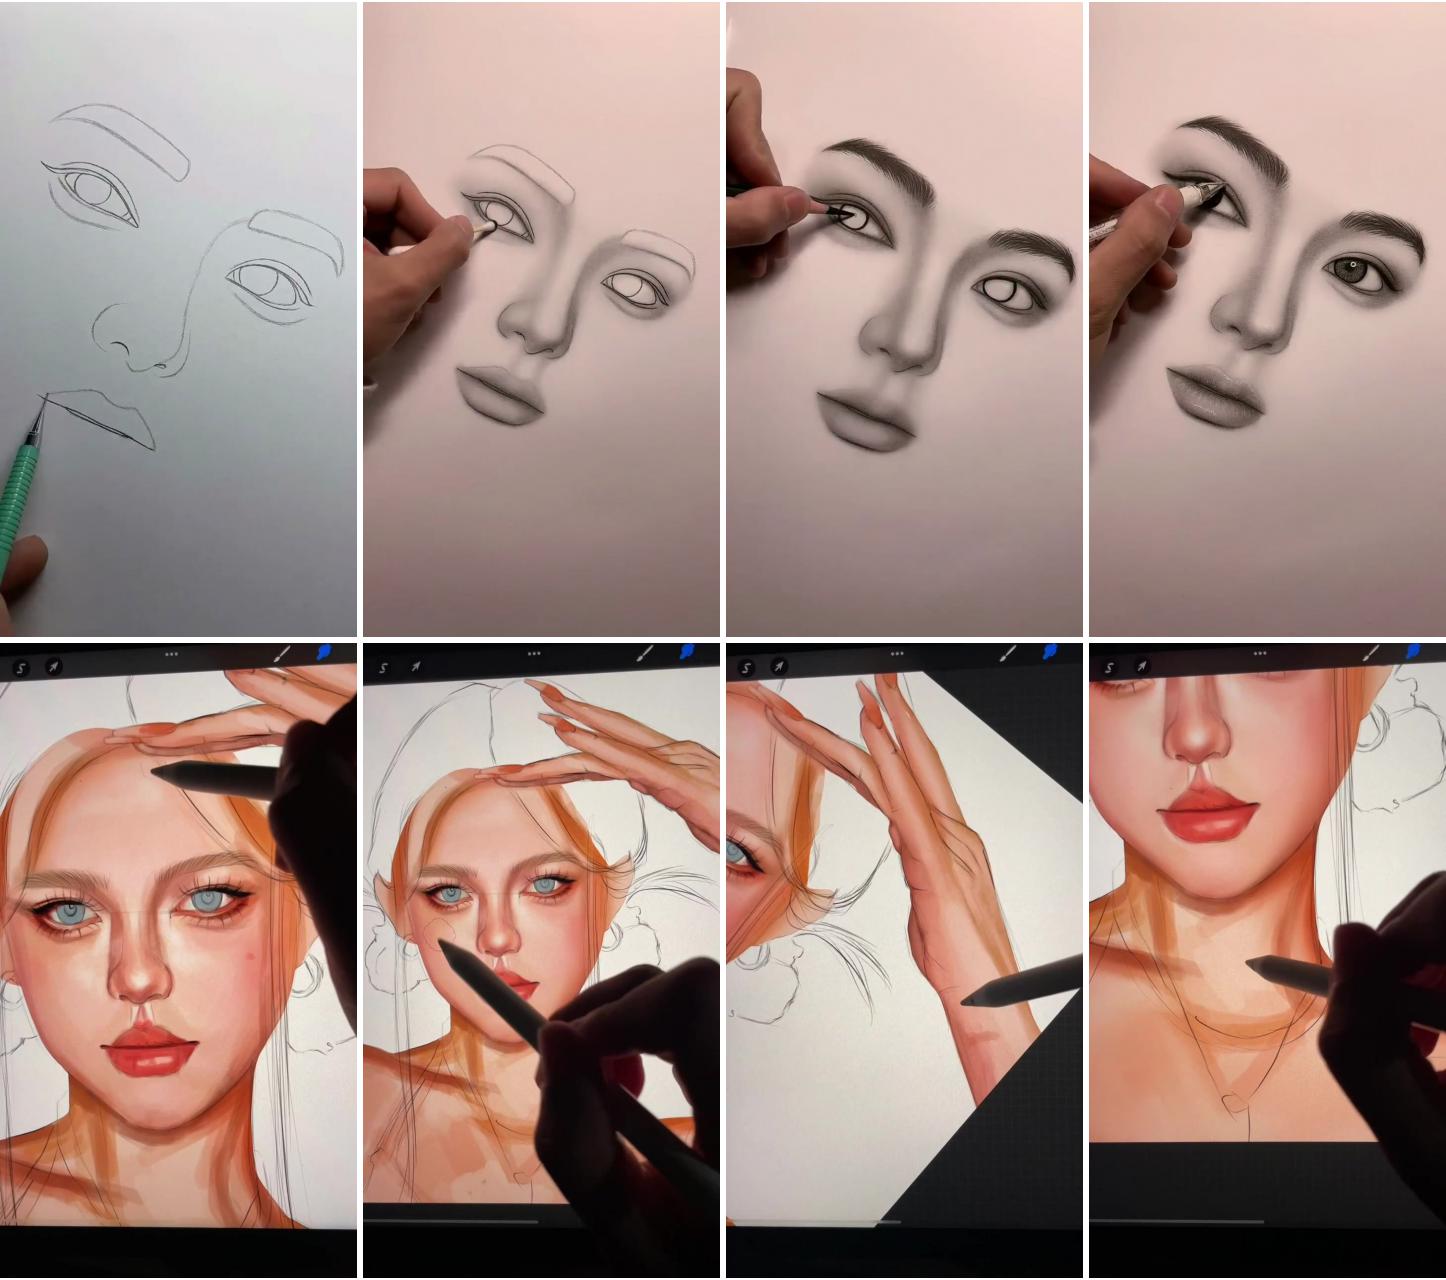 Get inspired | blending tips: don't use gaussian blur for blending if you want to get better at drawing 